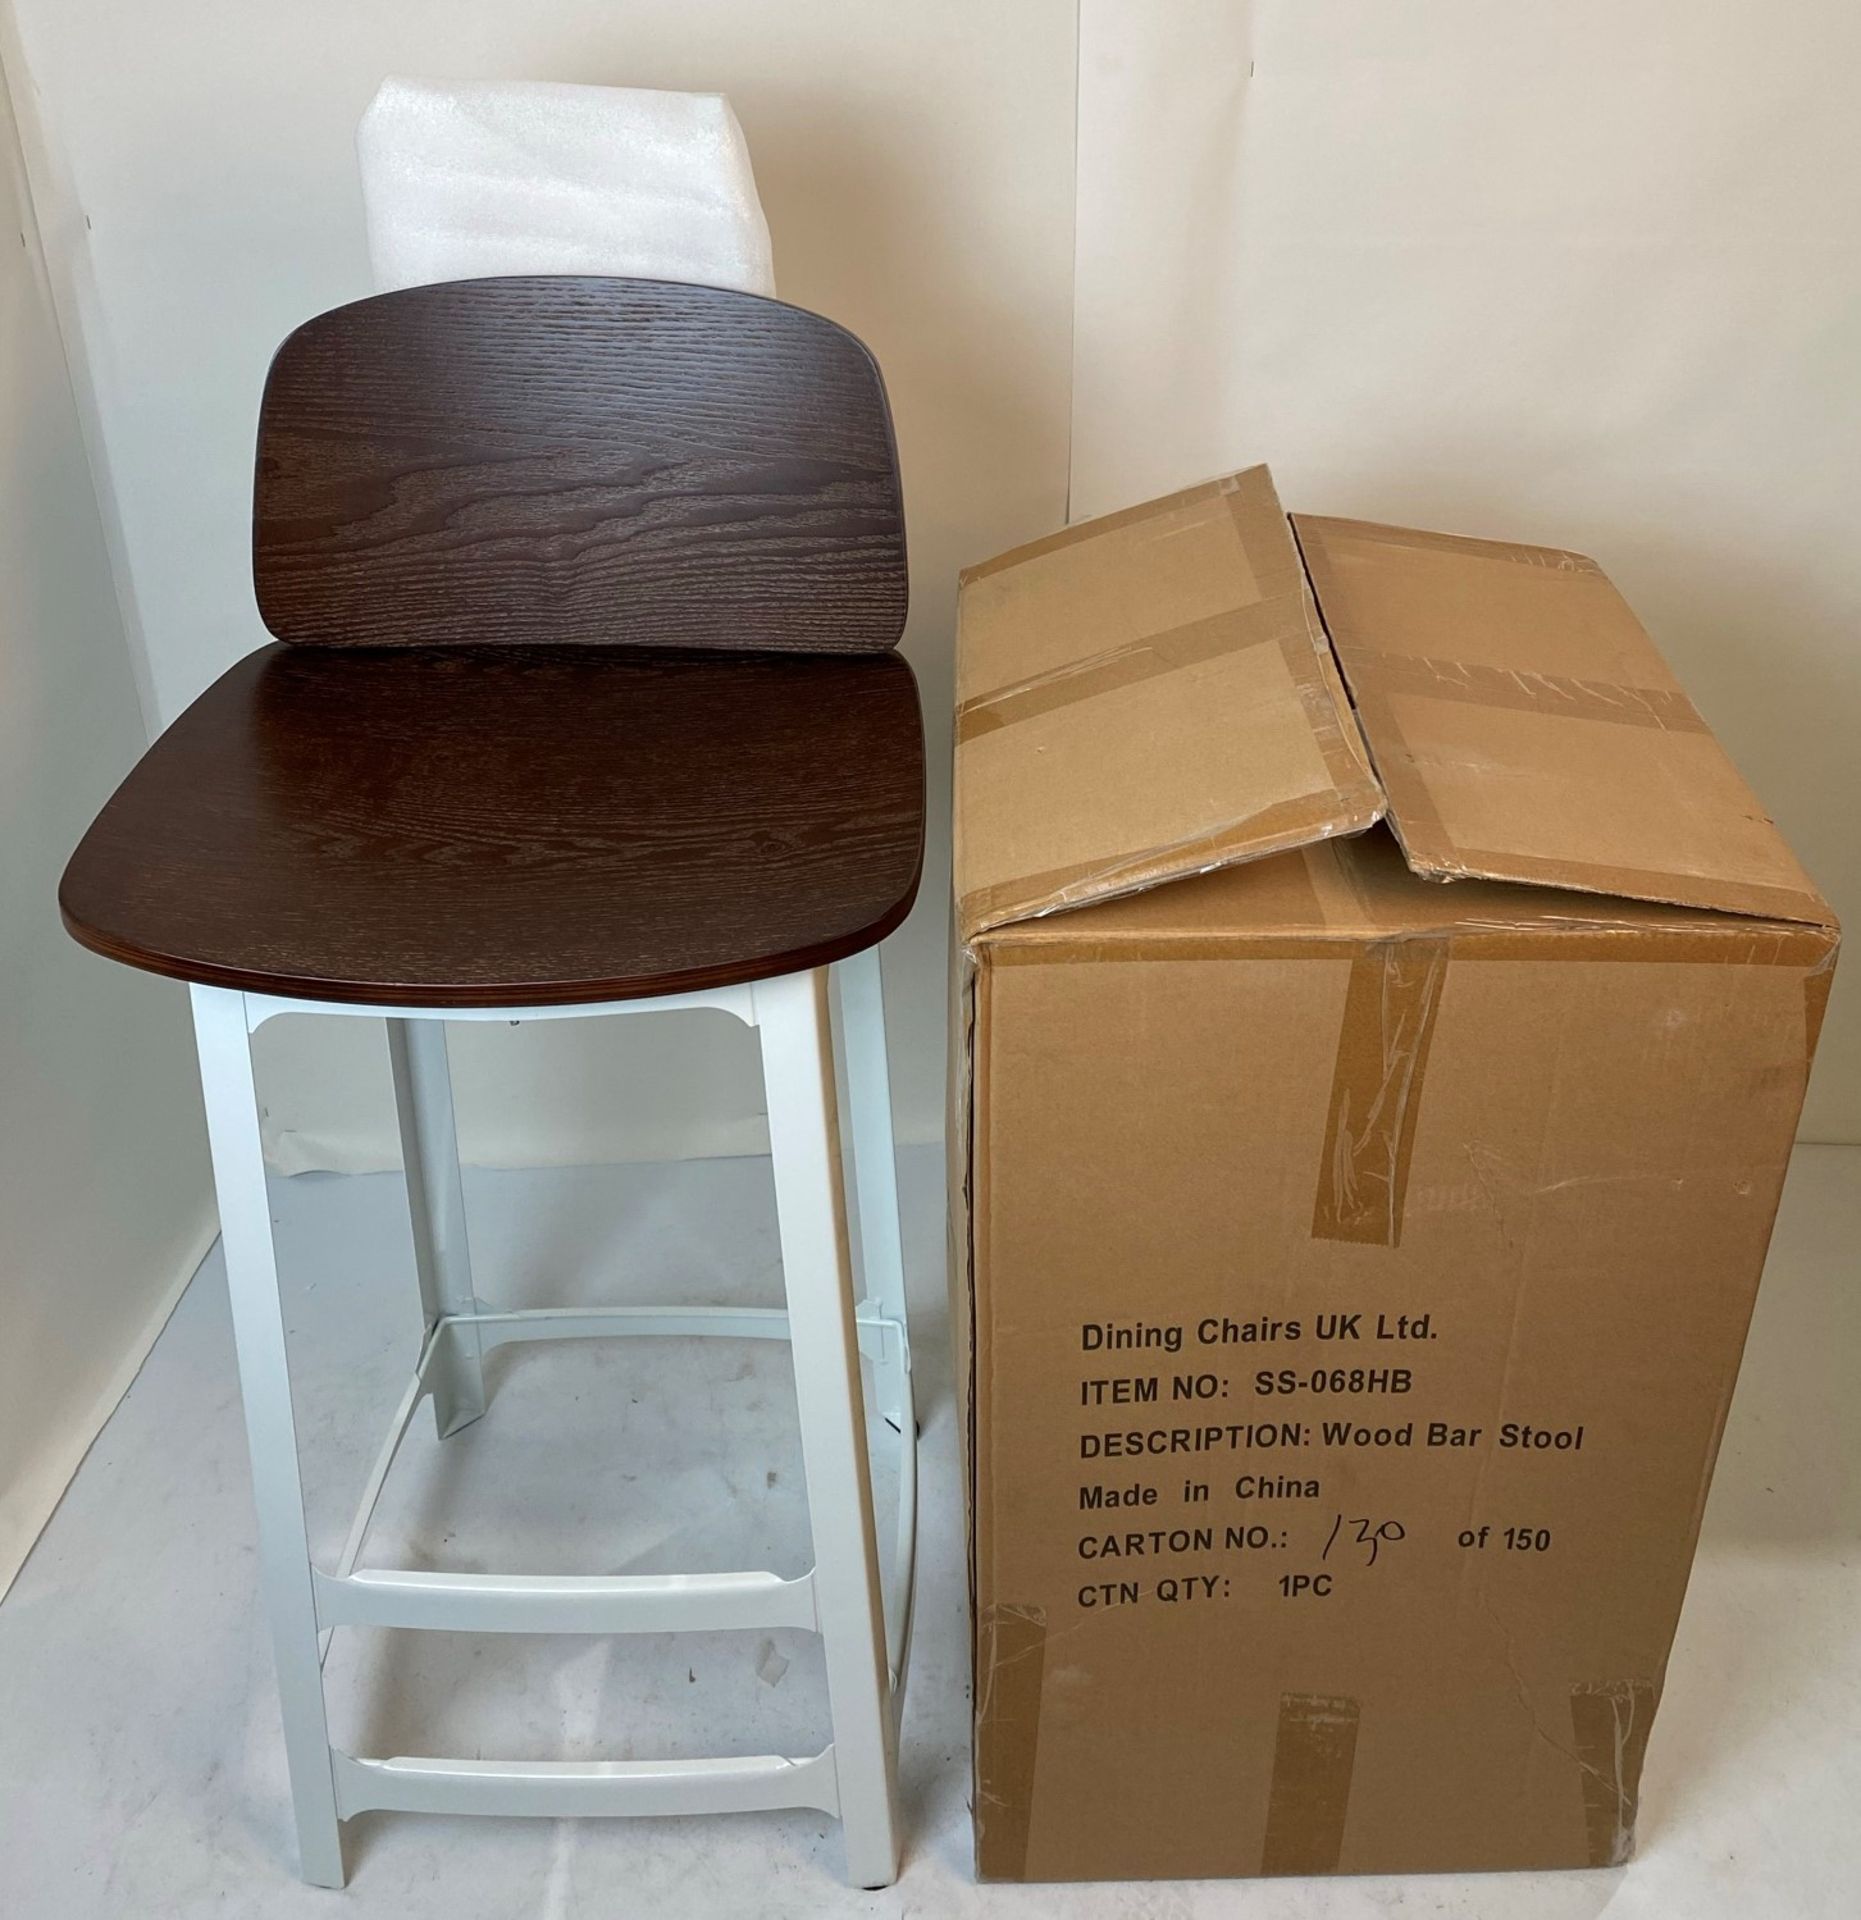 A white metal Dart high bar stool with wooden seat and back rest - Image 4 of 6